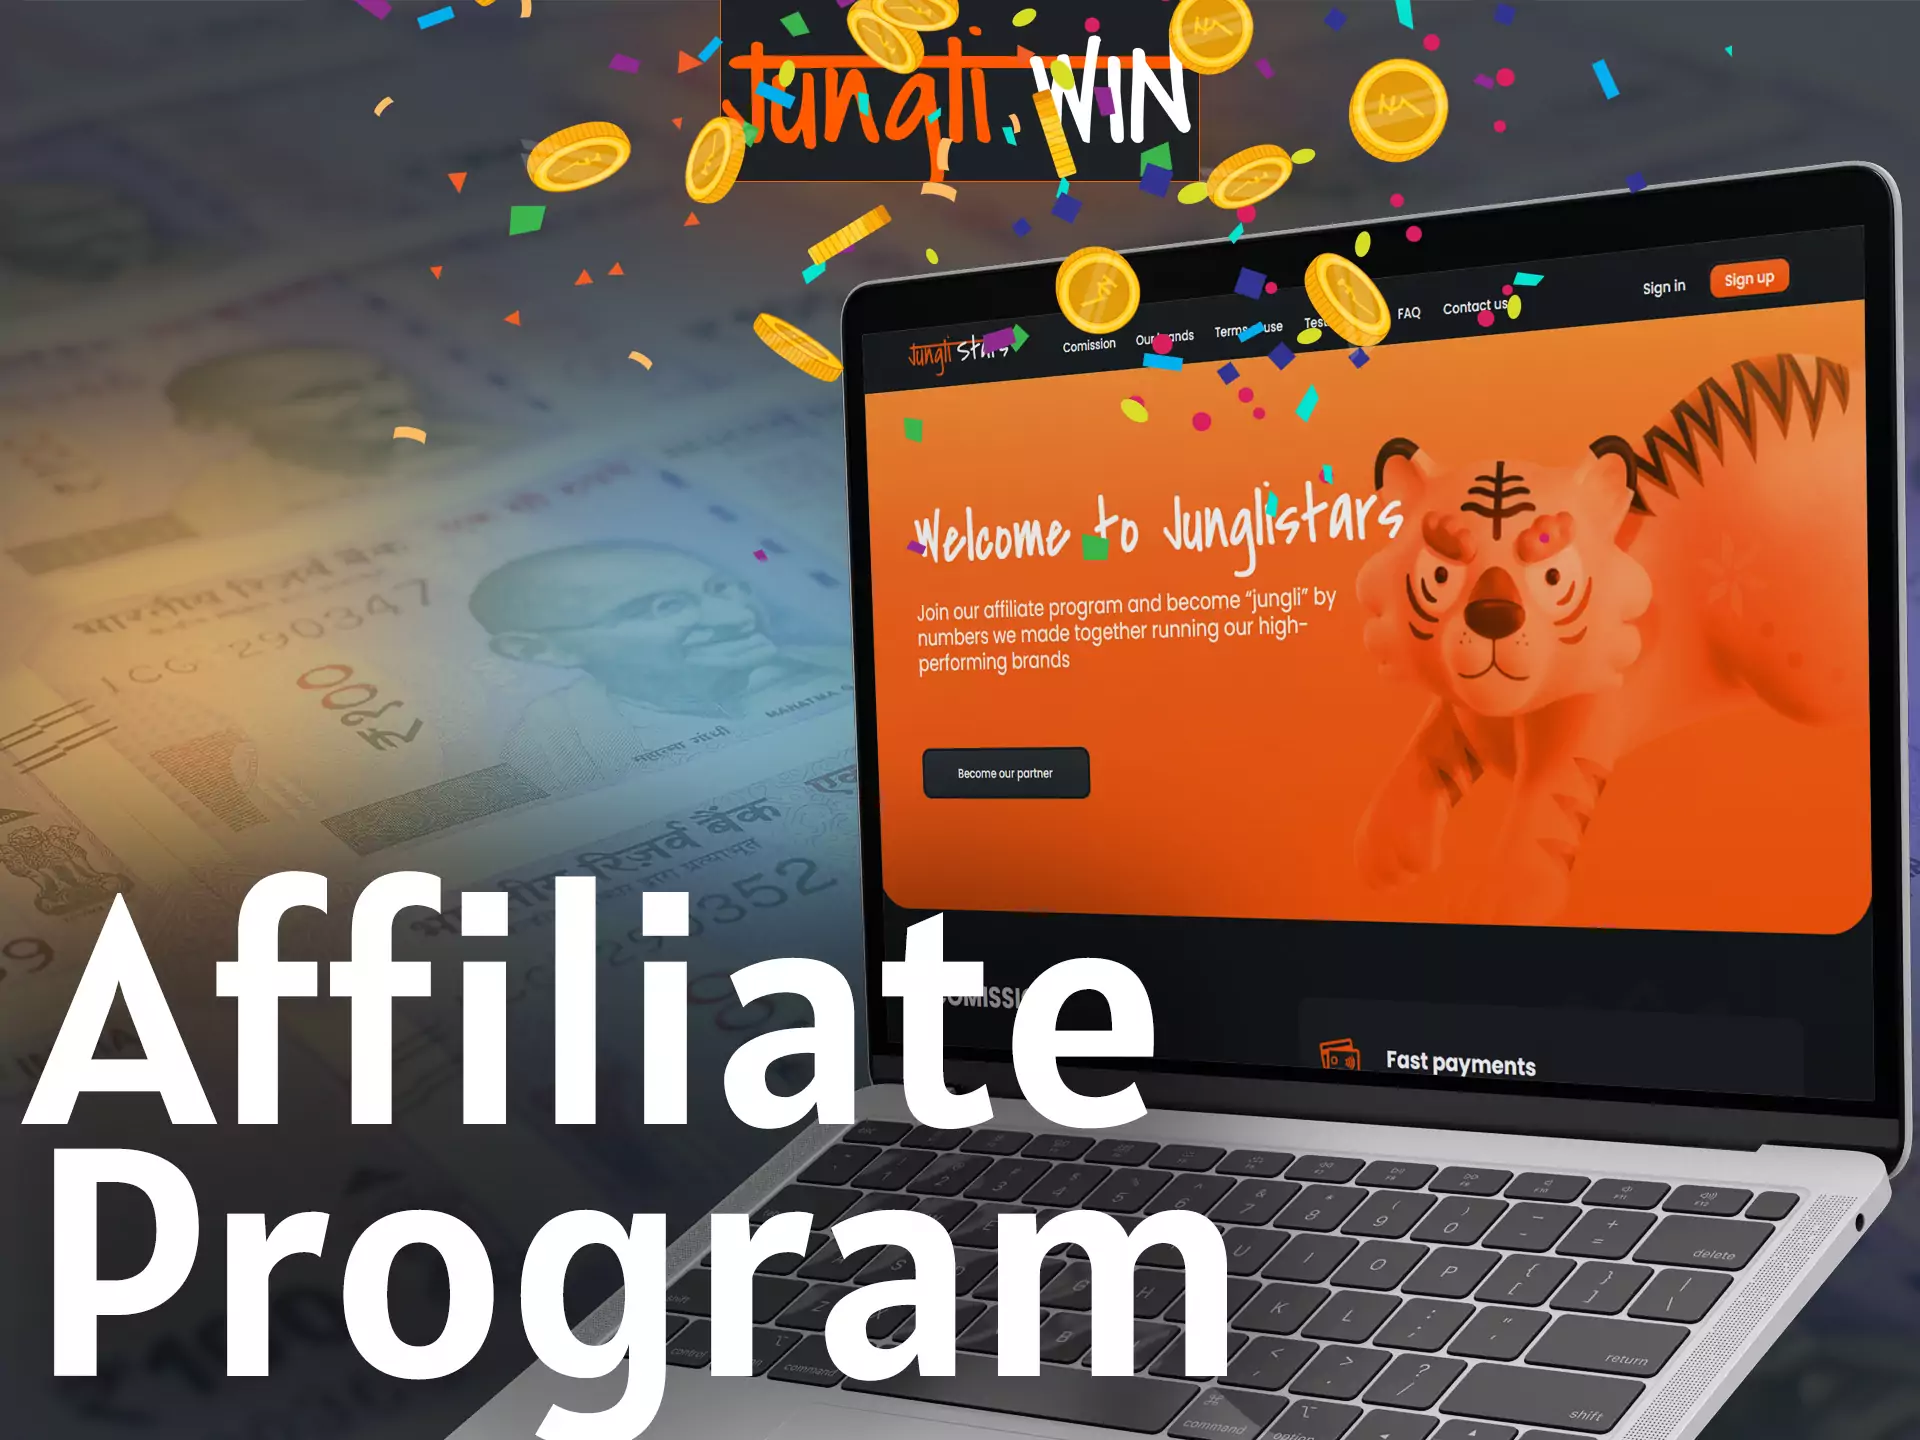 Jungliwin offers to try the benefits of the affiliate program.